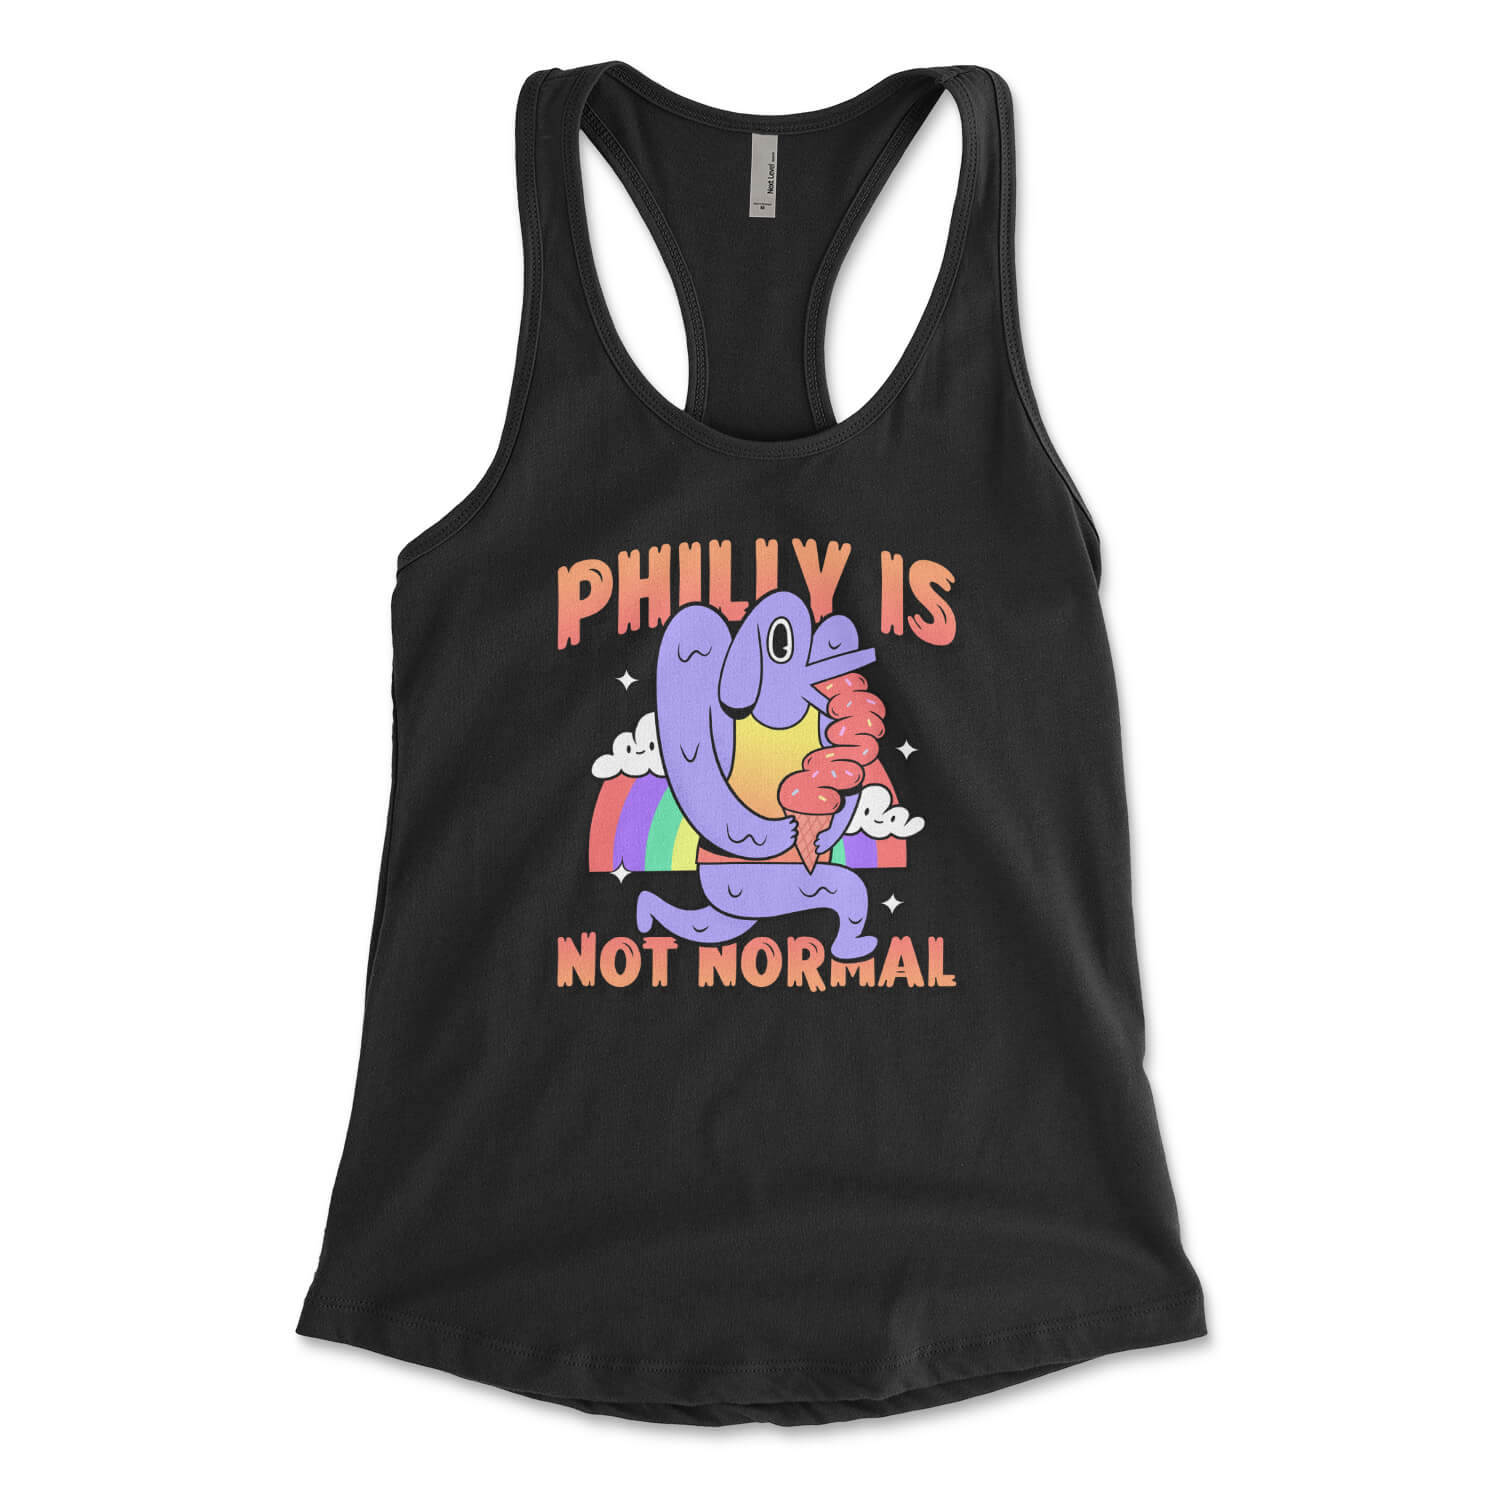 Philly is not normal dog licking ice cream in front of a rainbow design on a black womens racerback tank top from Phillygoat